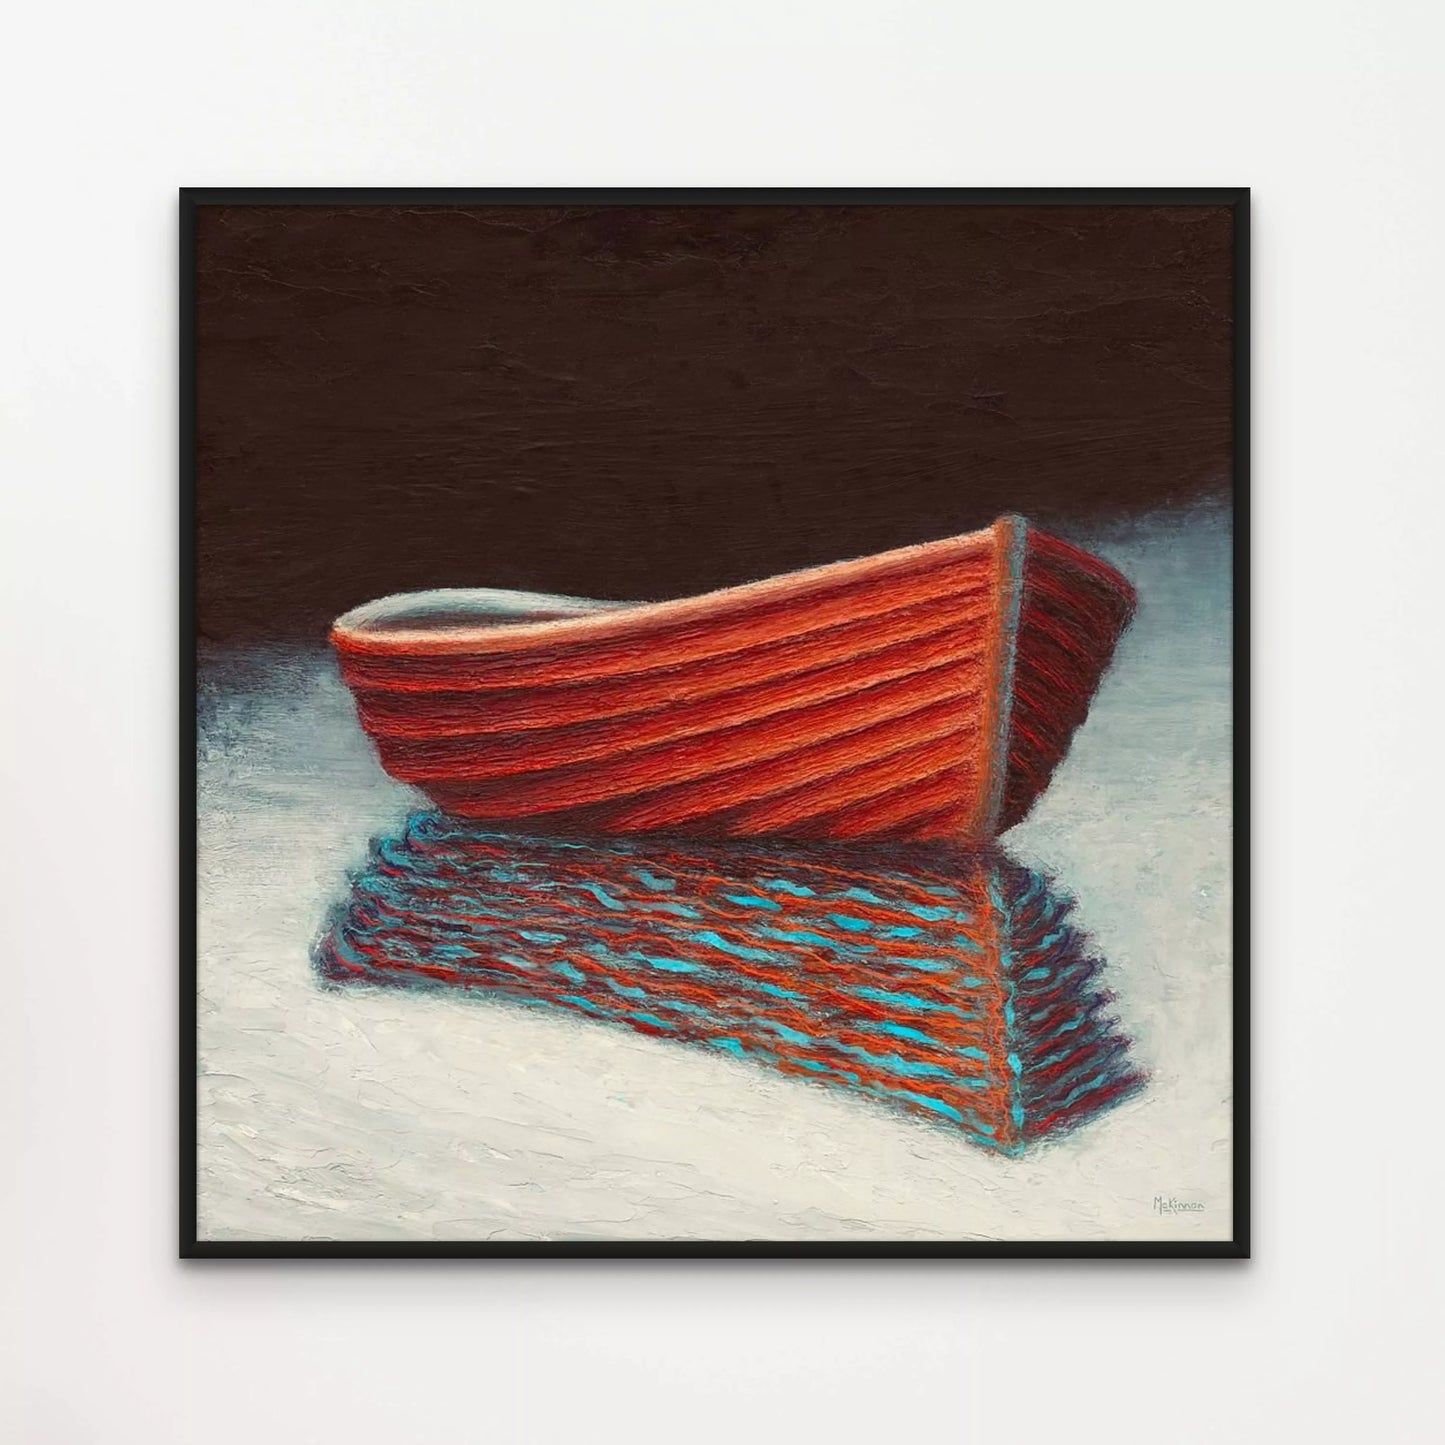 A minimalist painting of a wooden, lapstraked Viking rowboat, empty and floating on the water. The boat casts a rippled turquoise and rusty-orange reflection on the water's surface. The nearly white foreground darkens to black. This boat painting is framed in a minimalist black frame and mounted on a white wall.